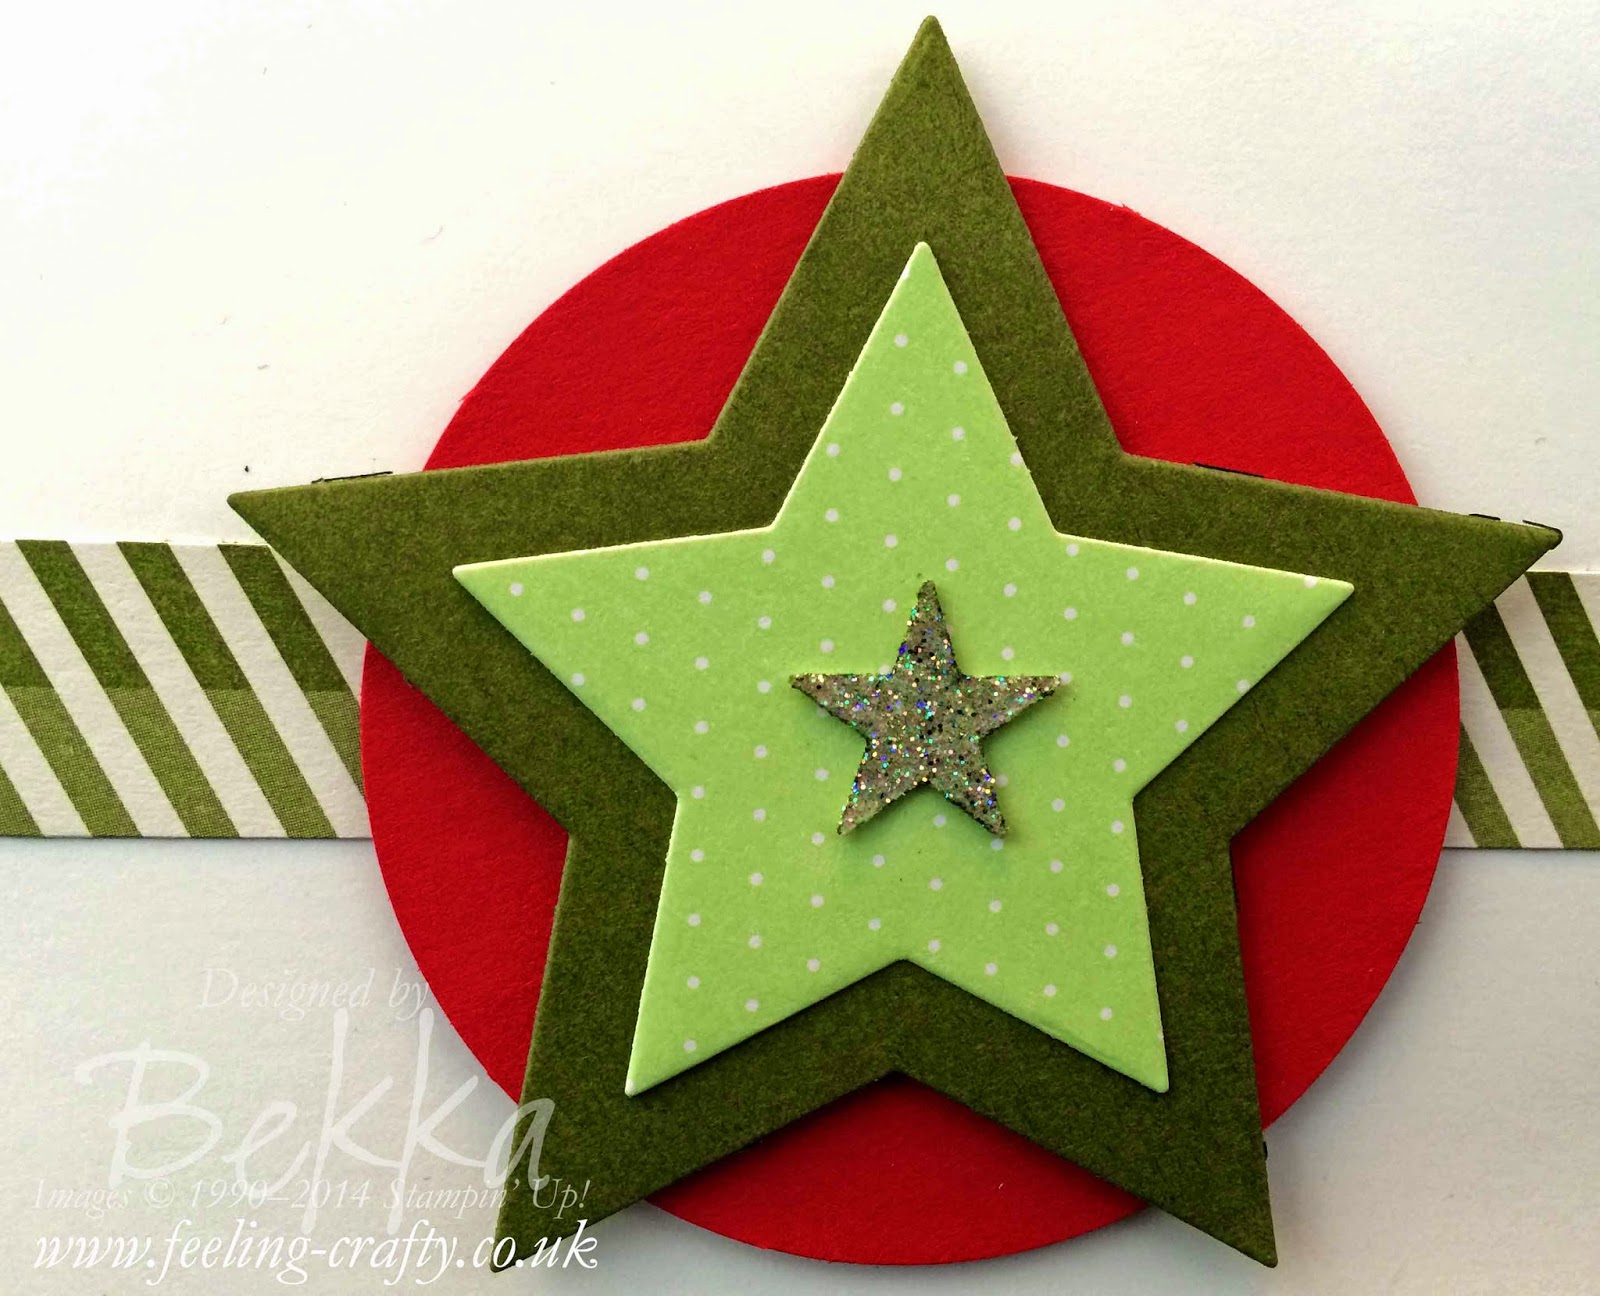 Christmas Scrapbook Page made with non Christmas Stampin' Up! Supplies - check this blog ever week for Scrapbooking Ideas